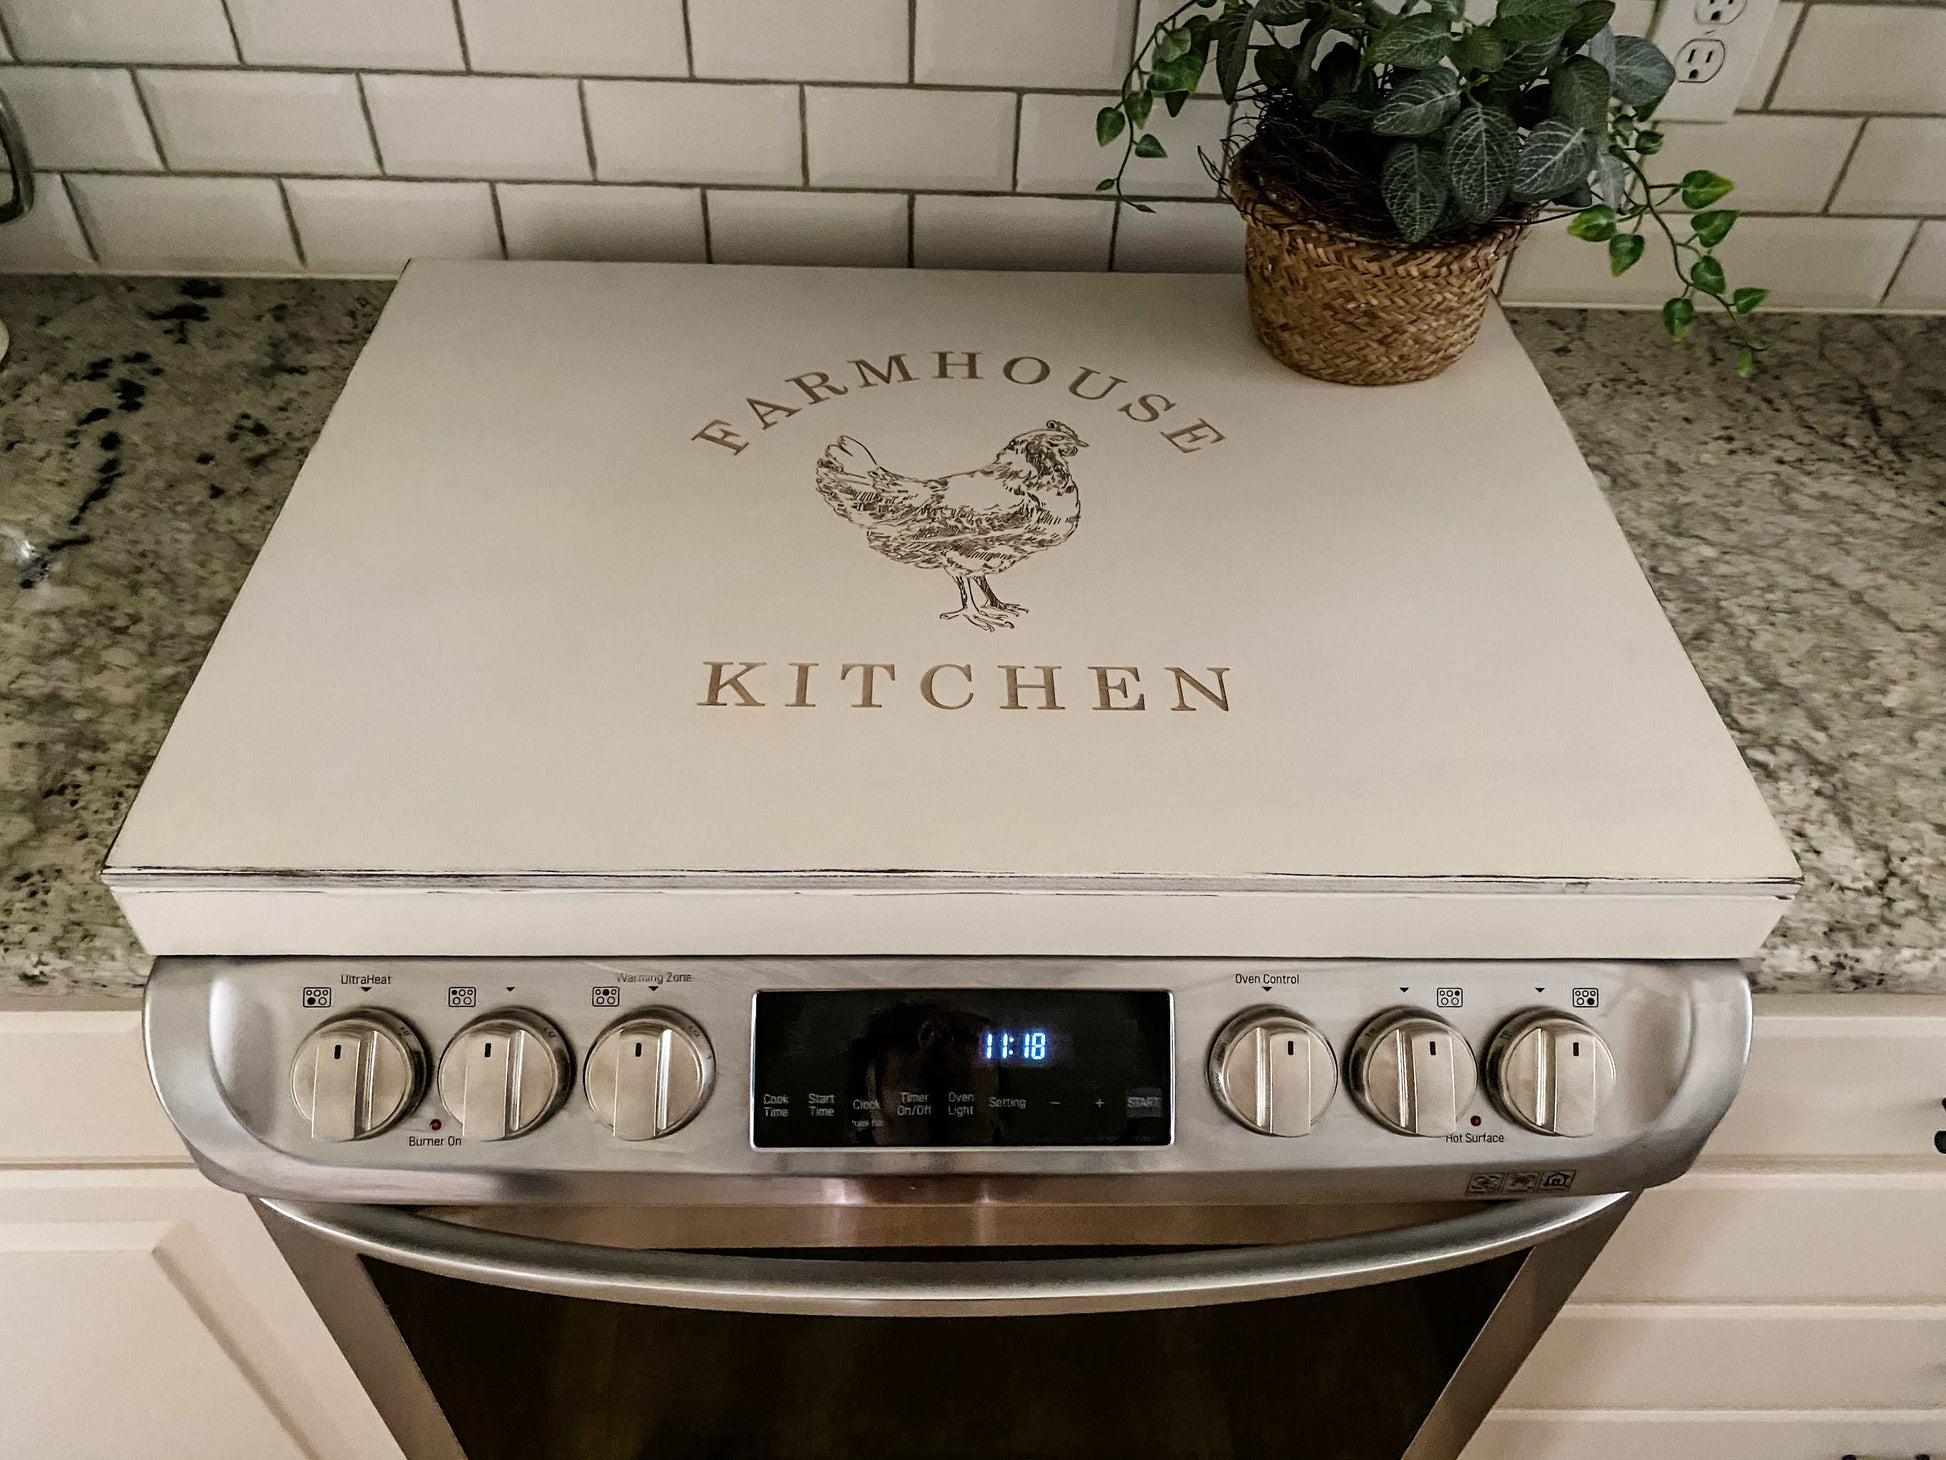 Noodle Board, Stove Cover, Farmhouse Style, Electric Stove Cover